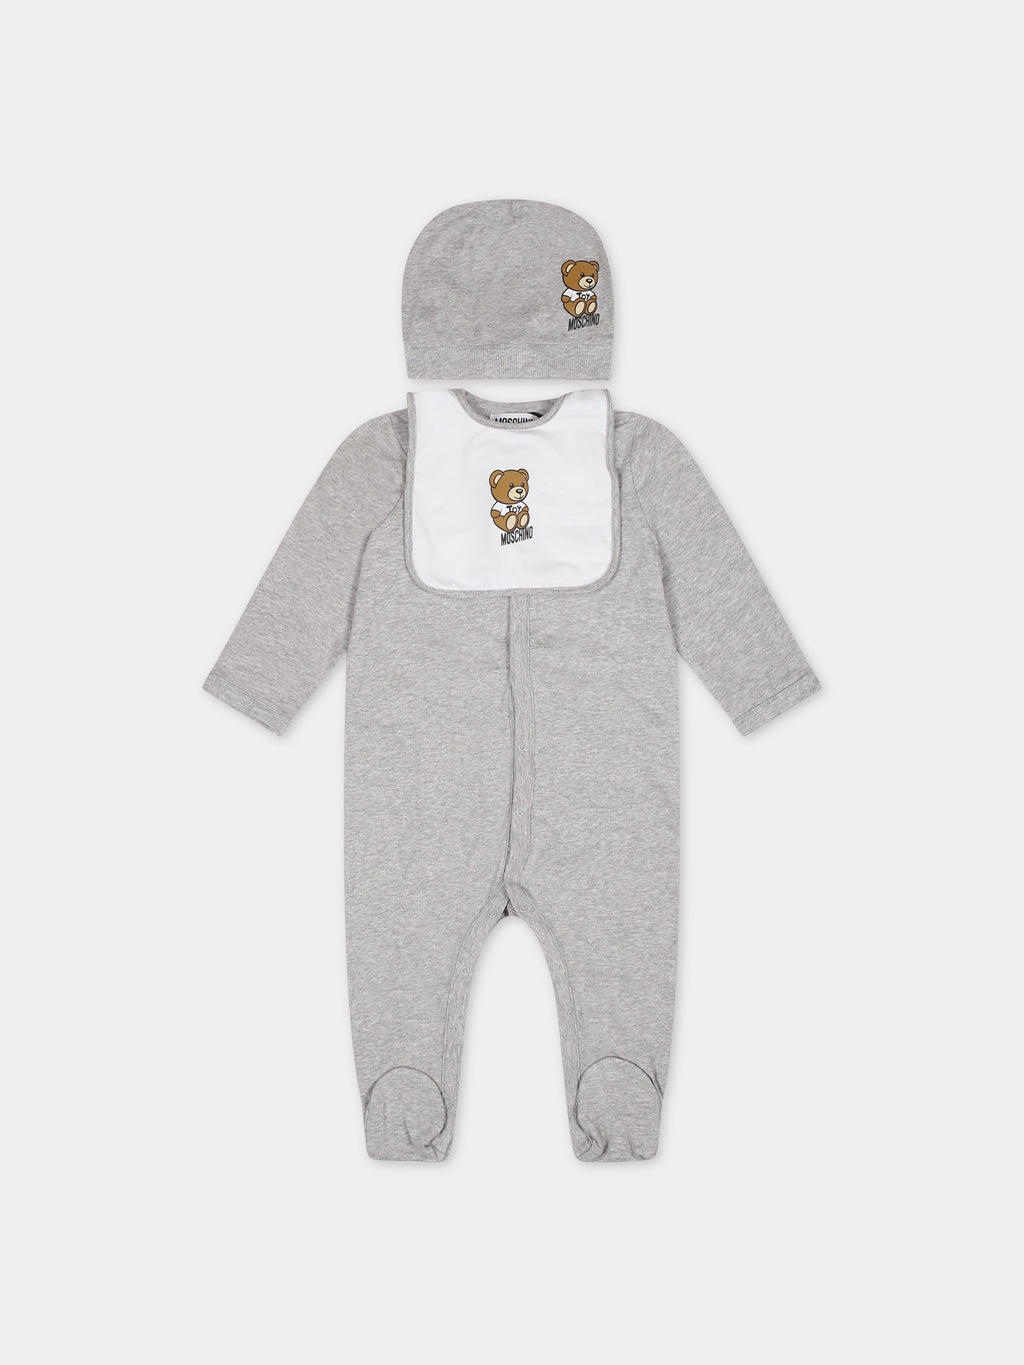 Grey set for baby kids with Teddy Bear